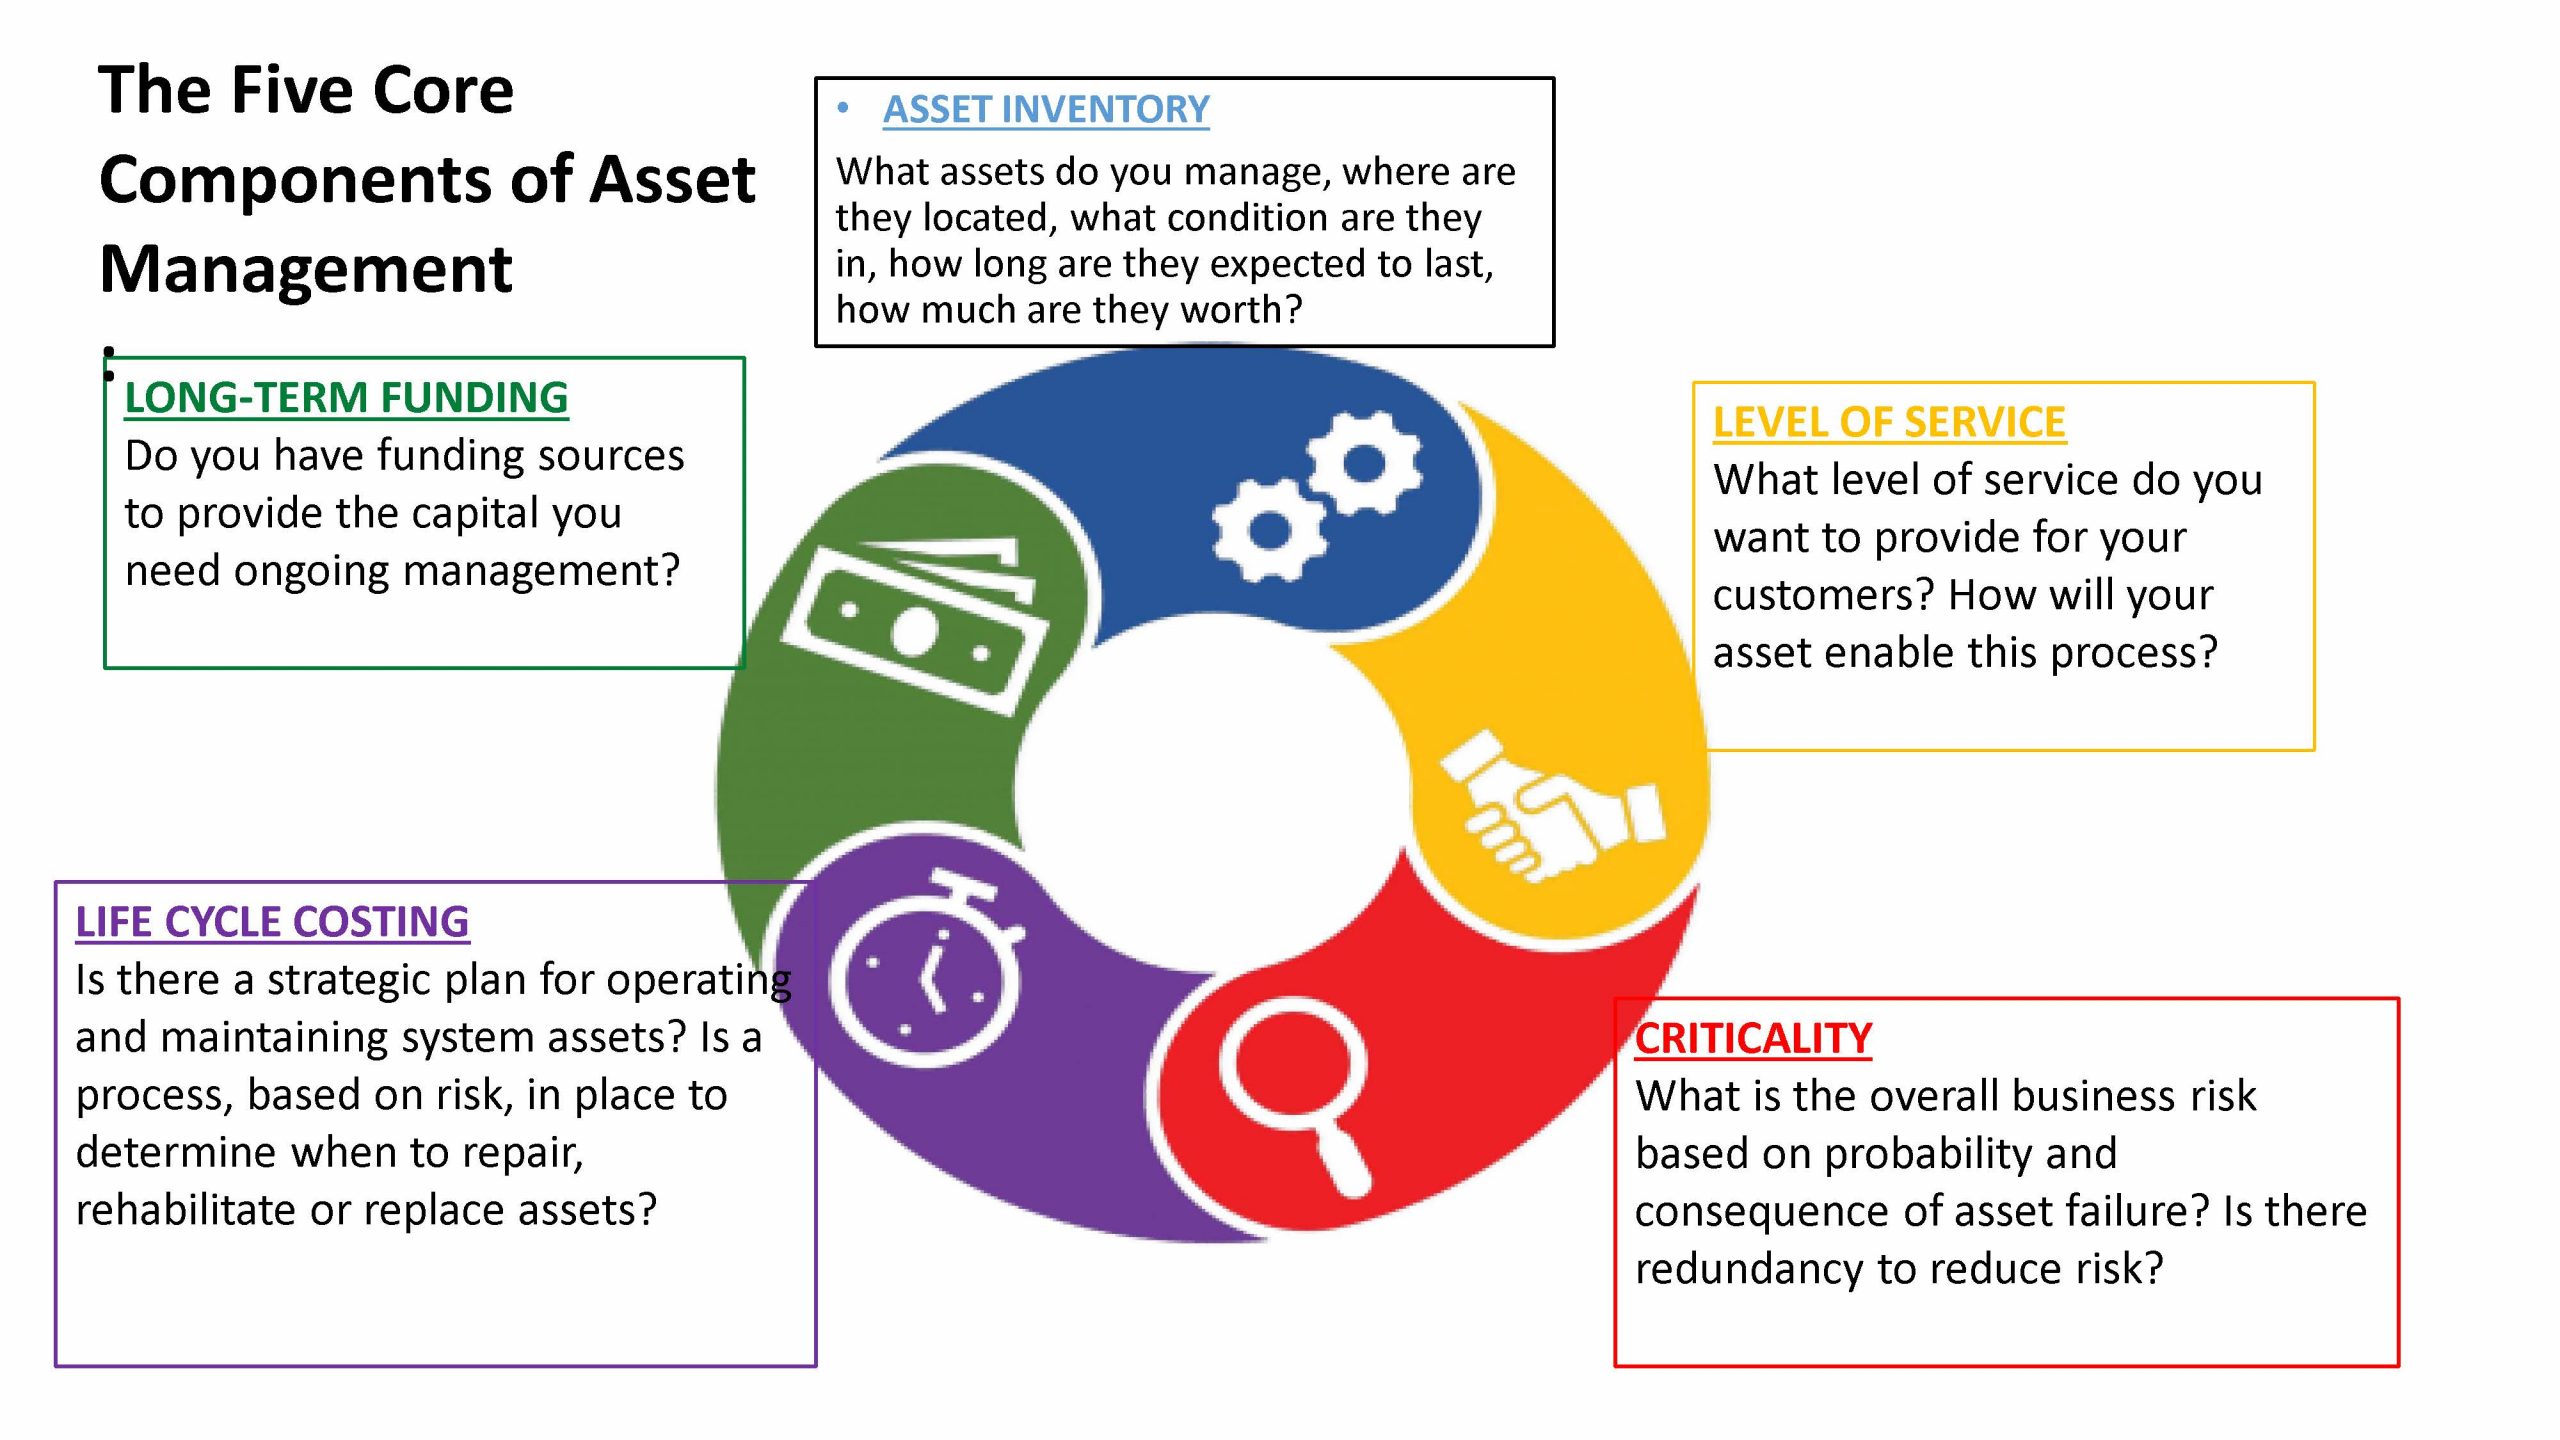 The image shows the five core components of asset management as a circular process.